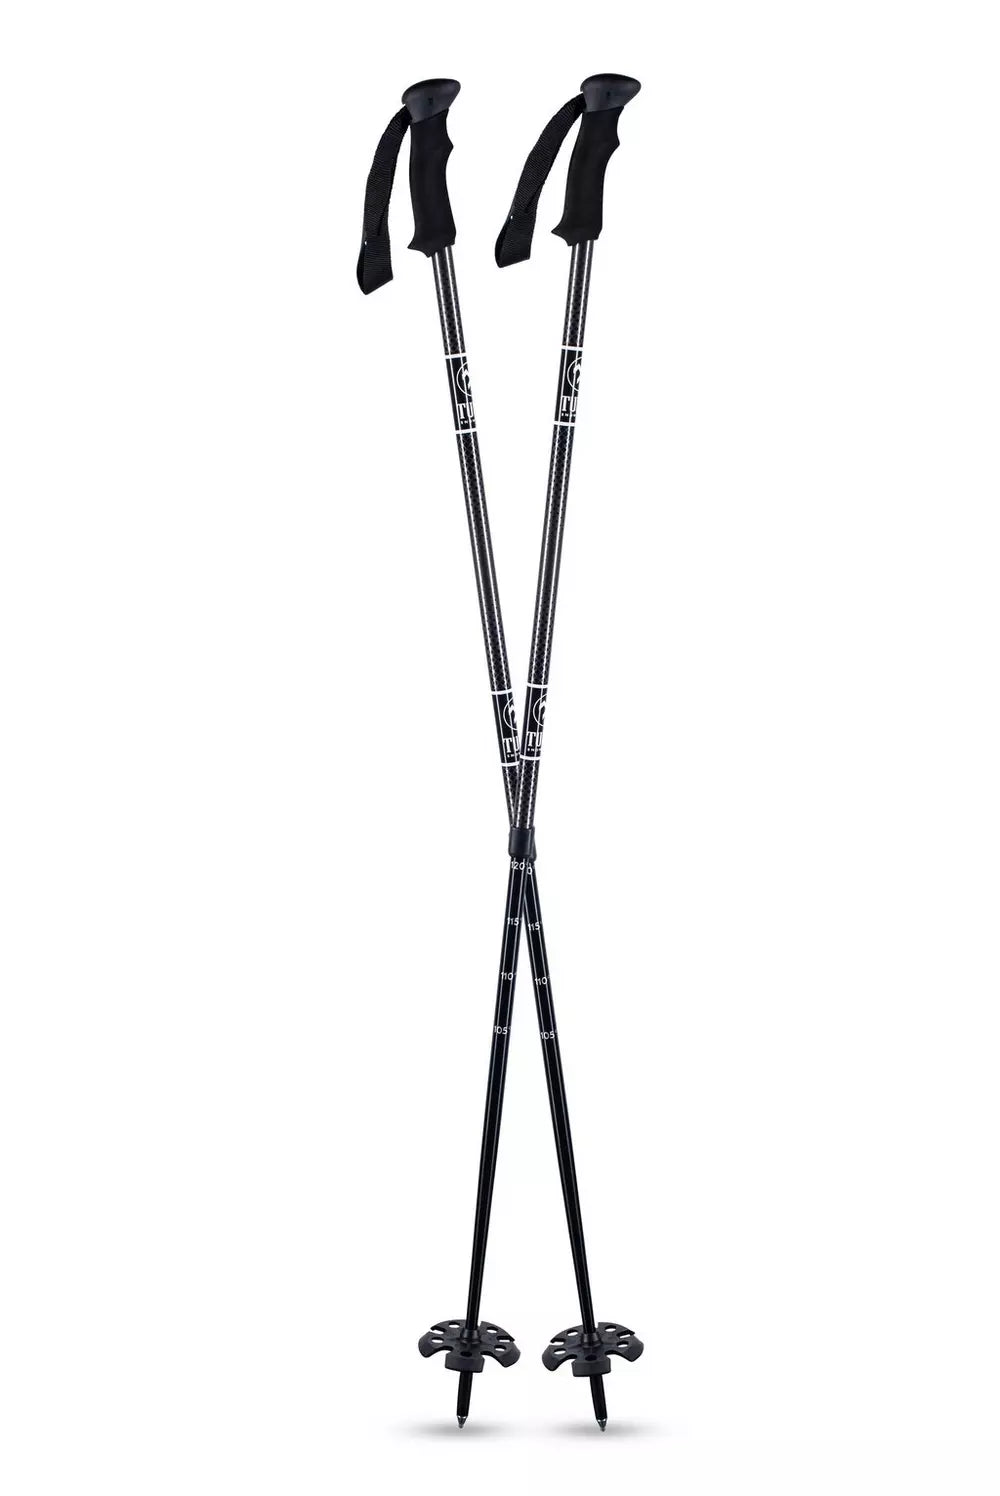 Tubbs 2 Piece Trail Walking and Snowshoe Poles